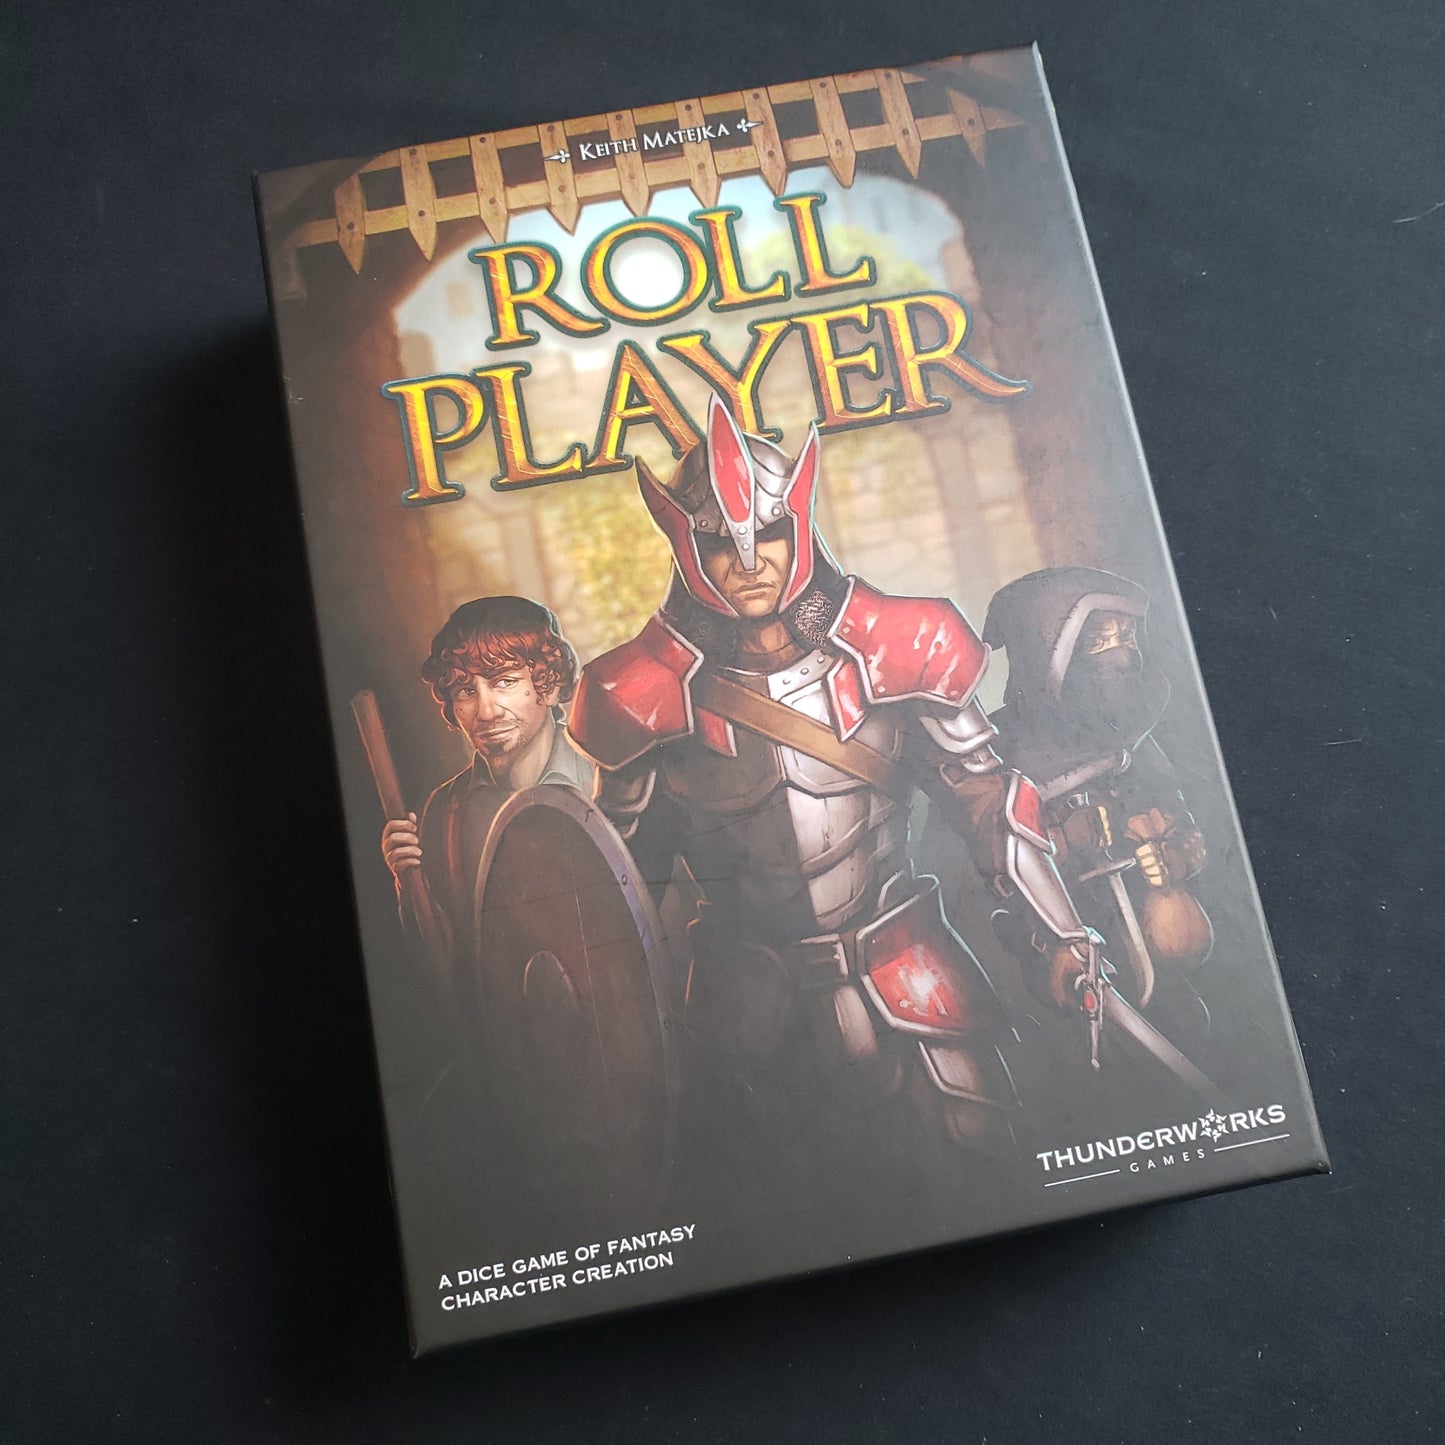 Image shows the front cover of the box of the Roll Player board game